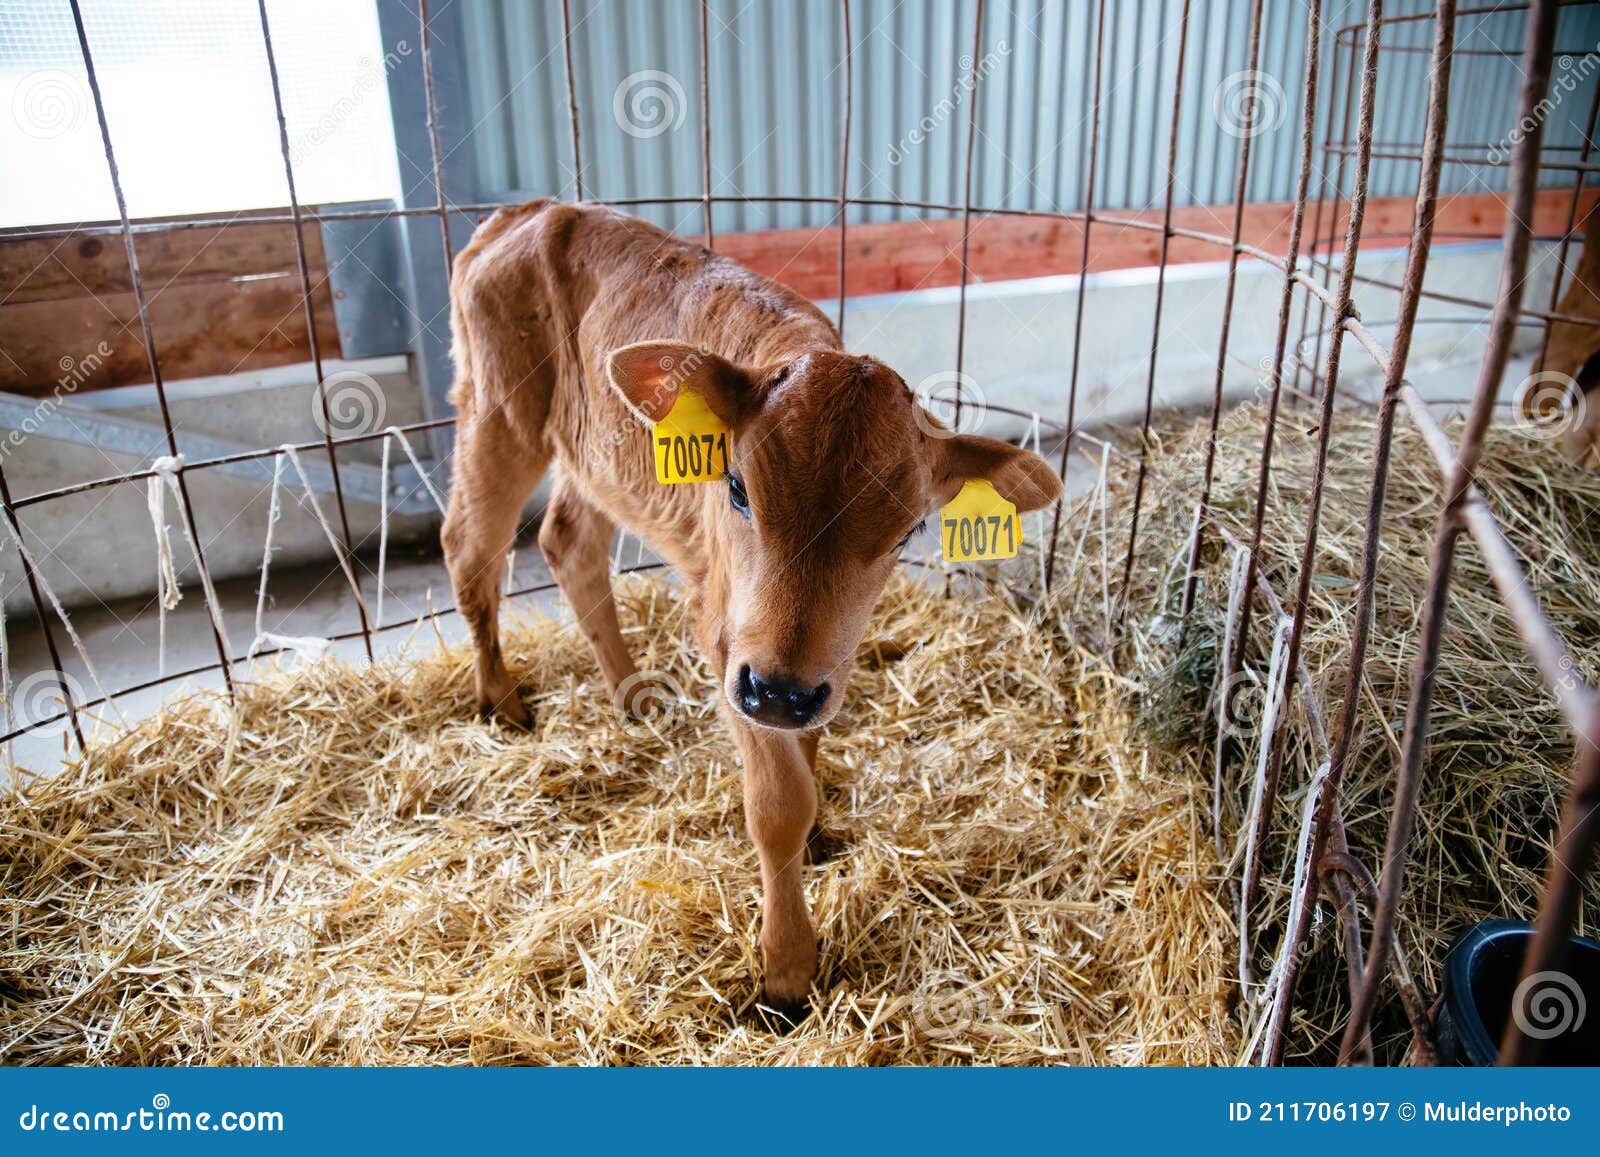 Young Calf Jersey Breed in a Stall for Calves with Straw Stock Image ...